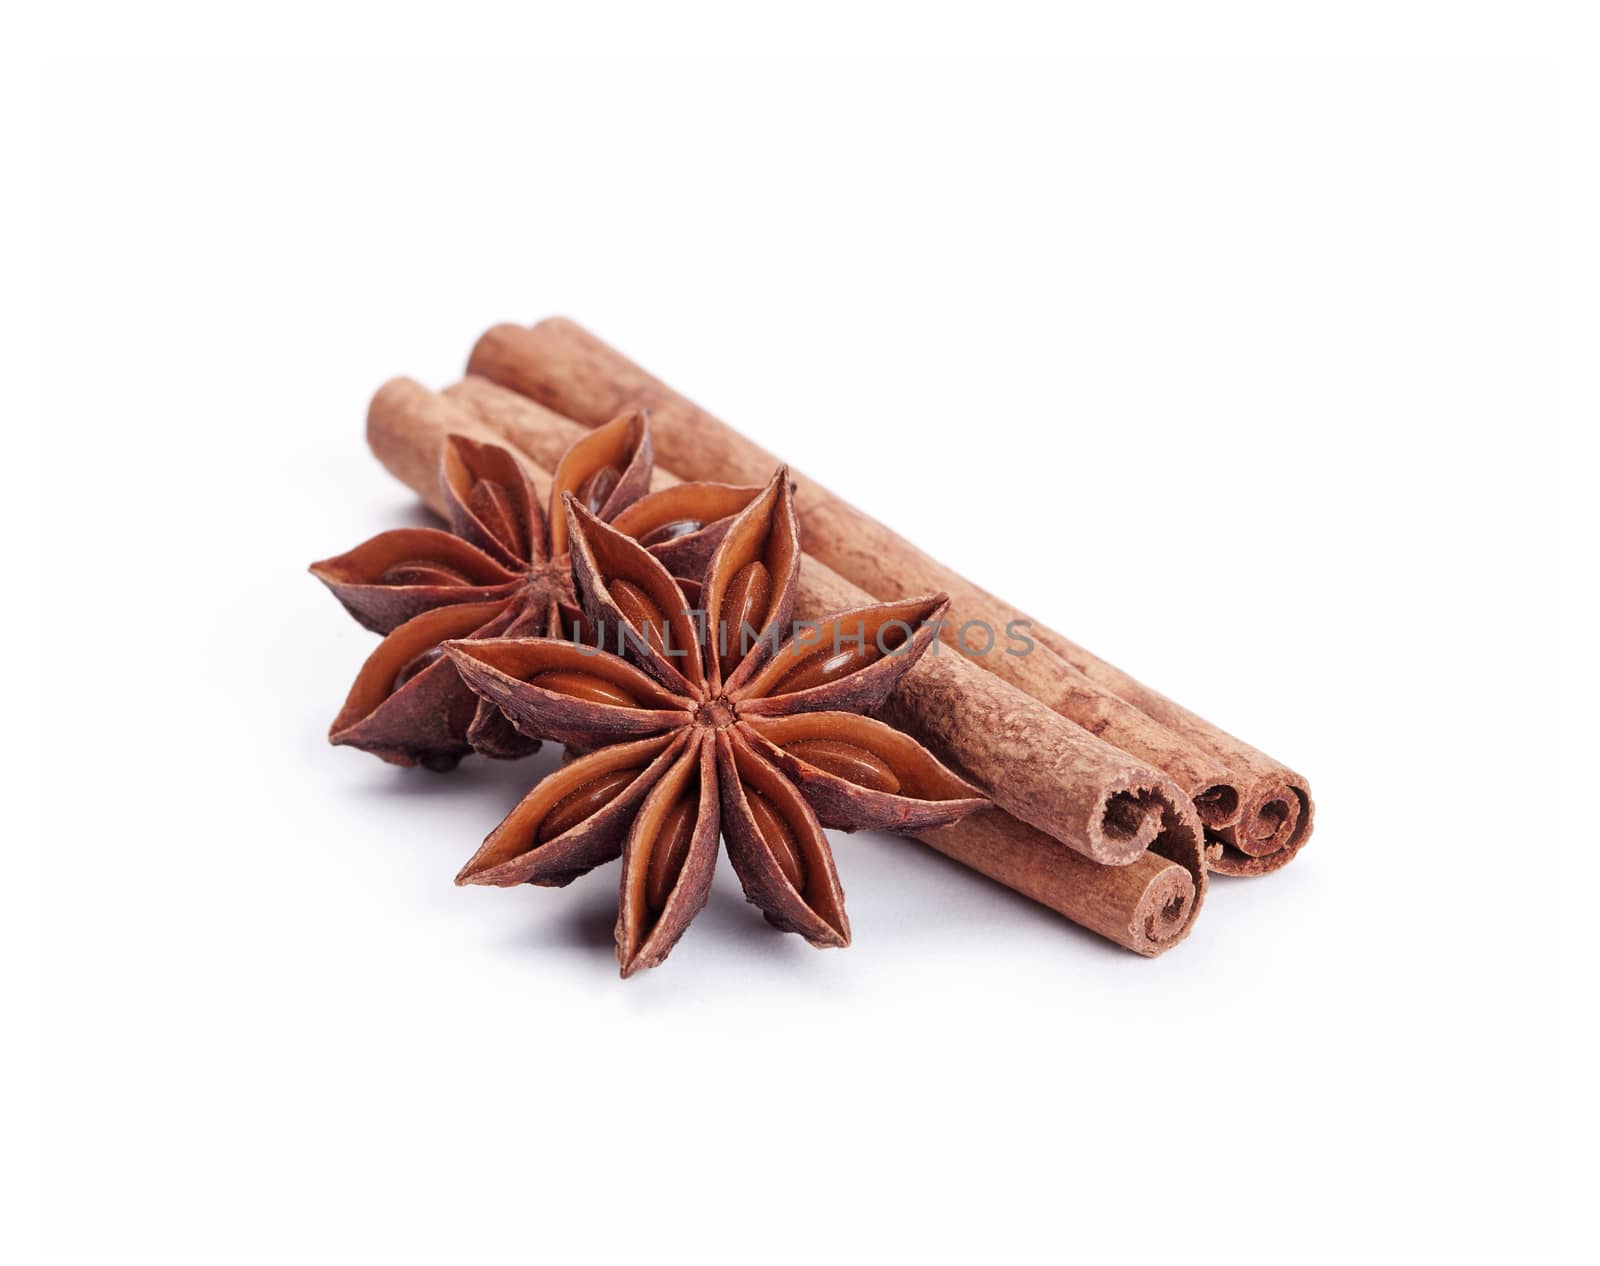 cinnamon stick and star anise spice isolated on white background closeup by ivo_13